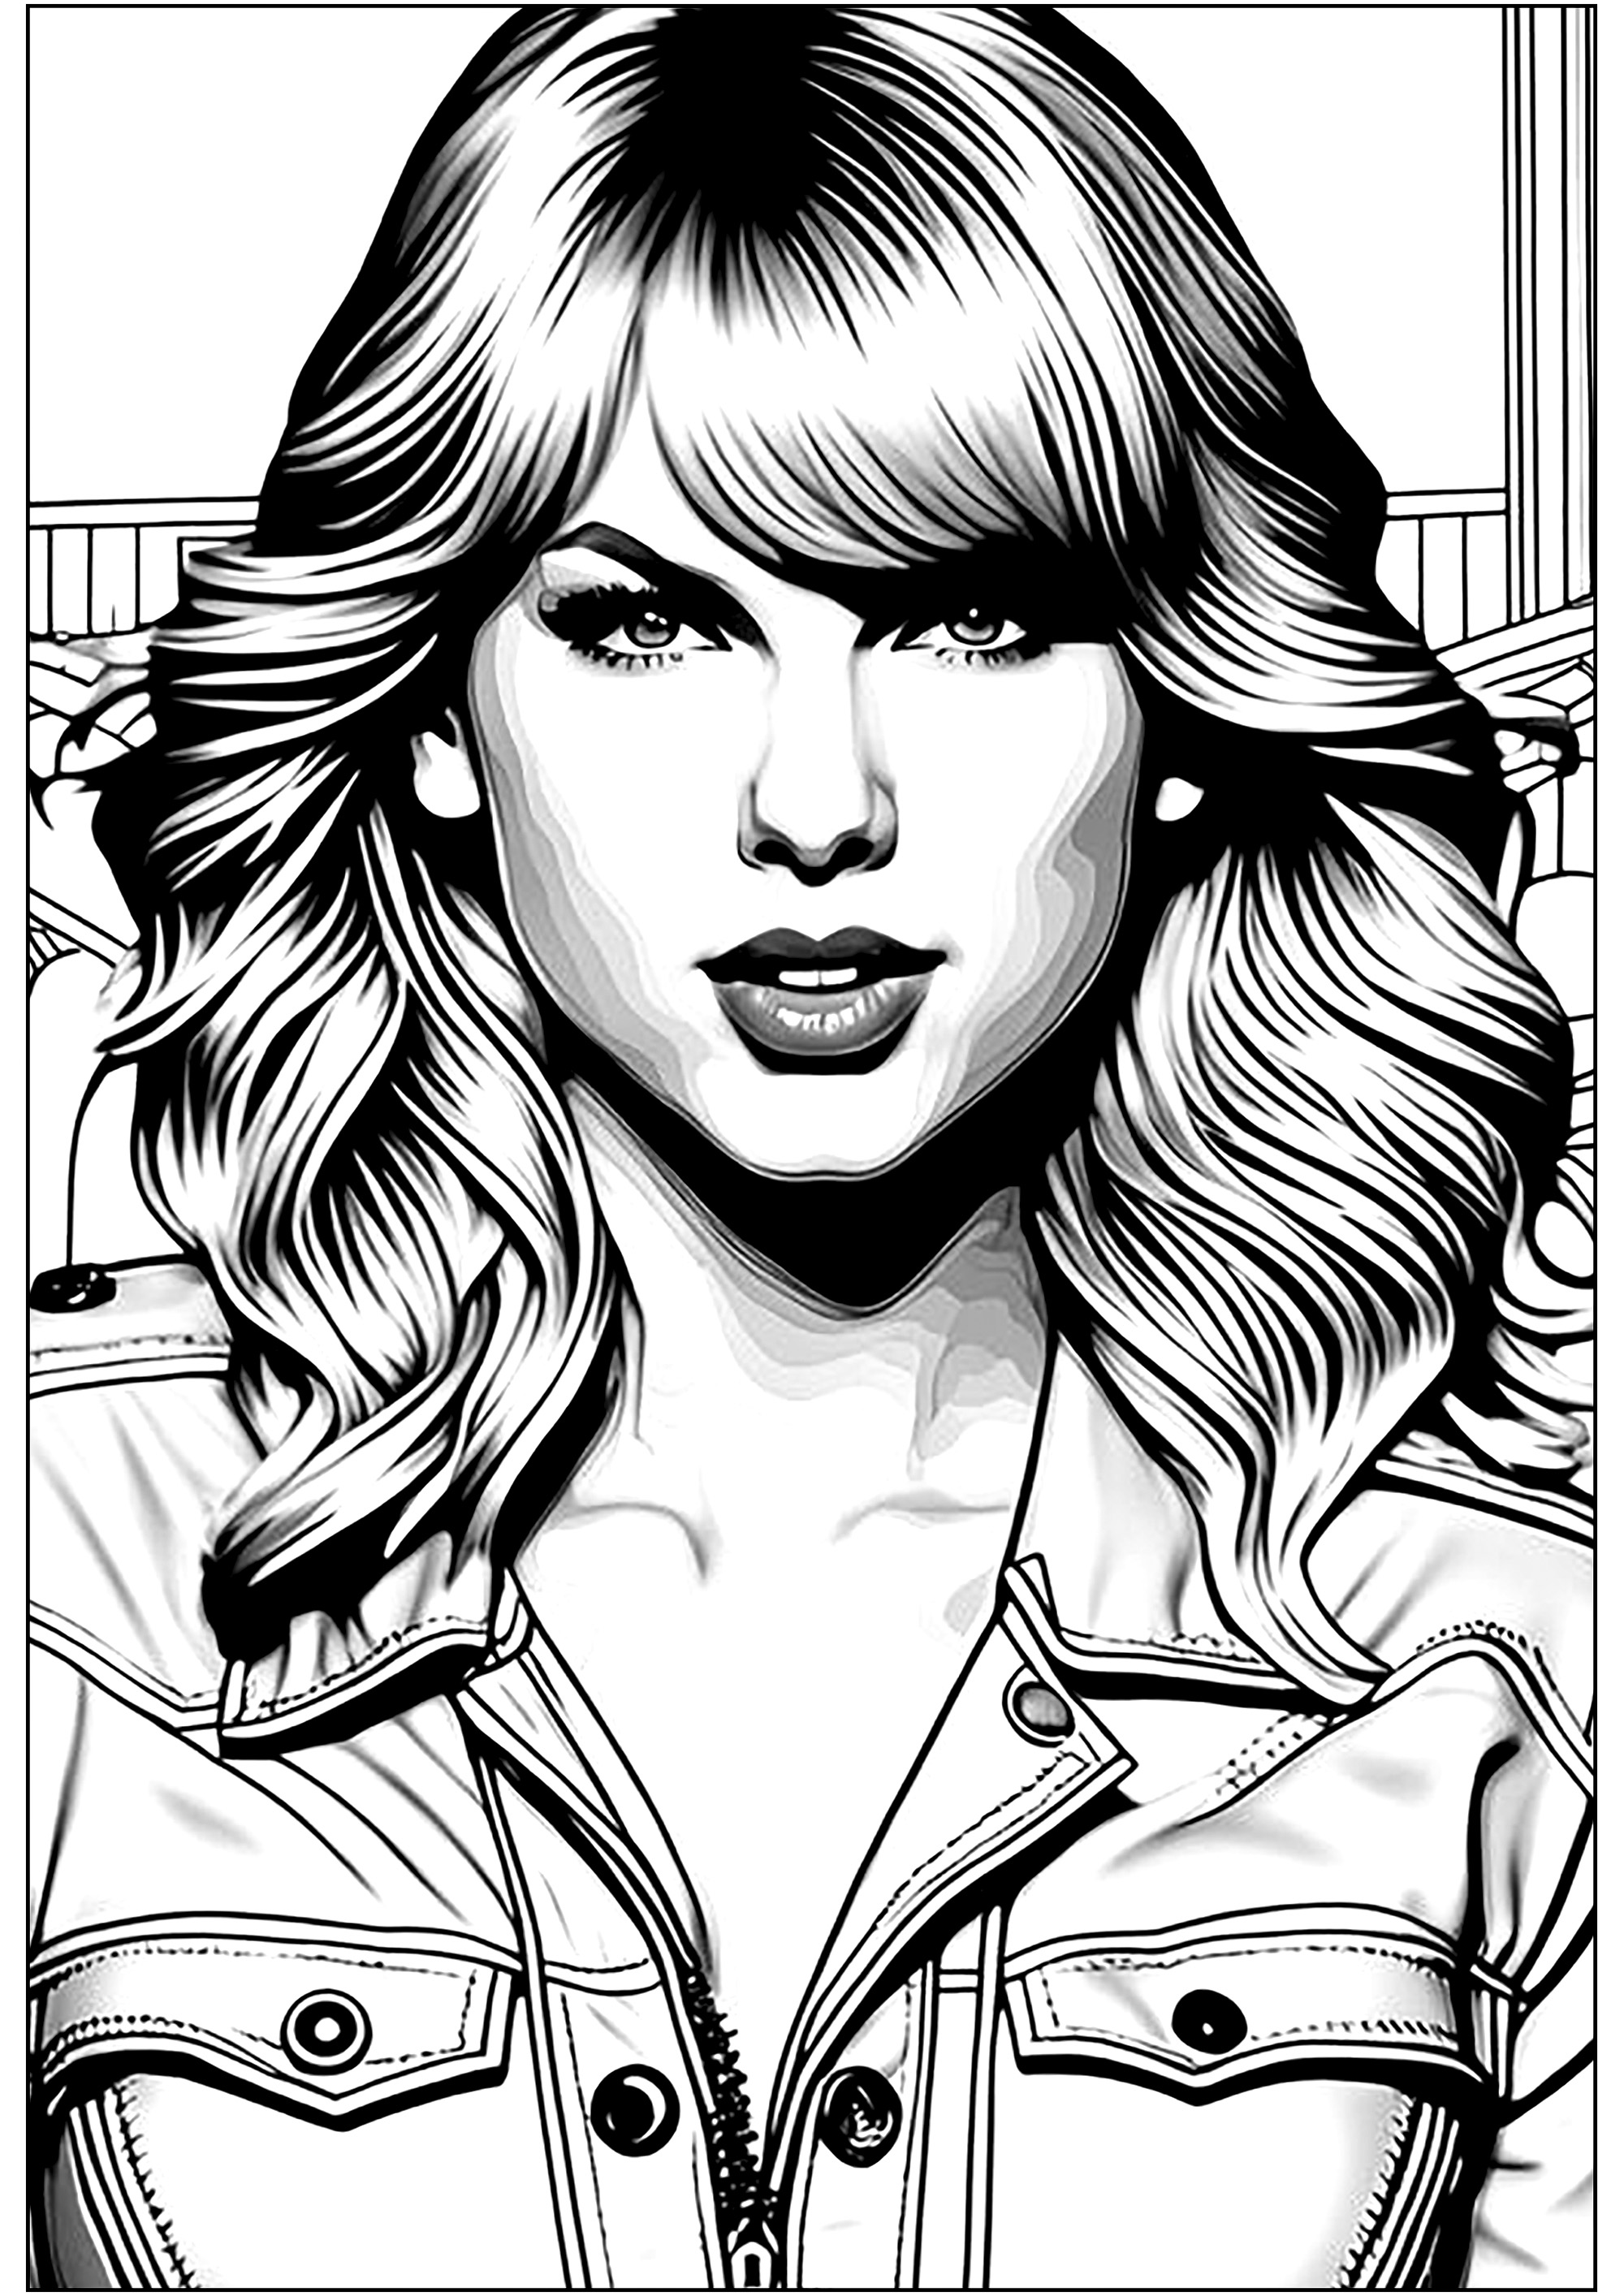 Taylor Swift coloring page. Taylor was barely 17 when she made her Nashville debut in 2006 on Scott Borchetta's Big Machine label. She released her first Country album, on which she wrote almost all the songs.